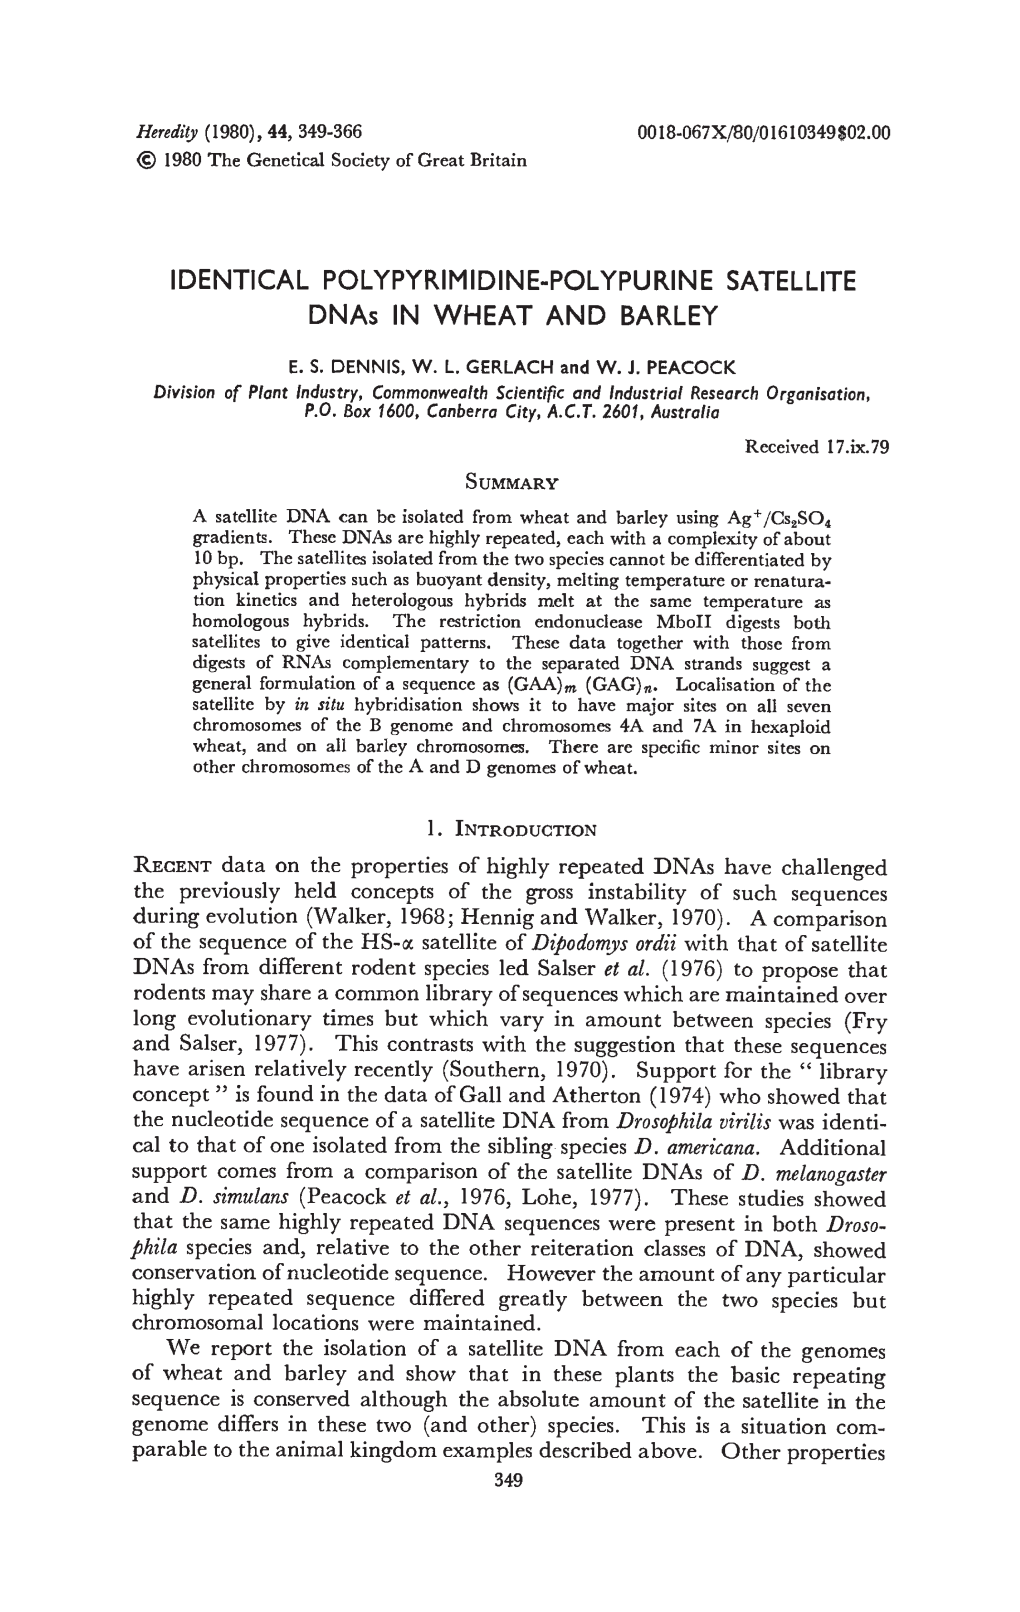 Dnas in WHEAT and BARLEY